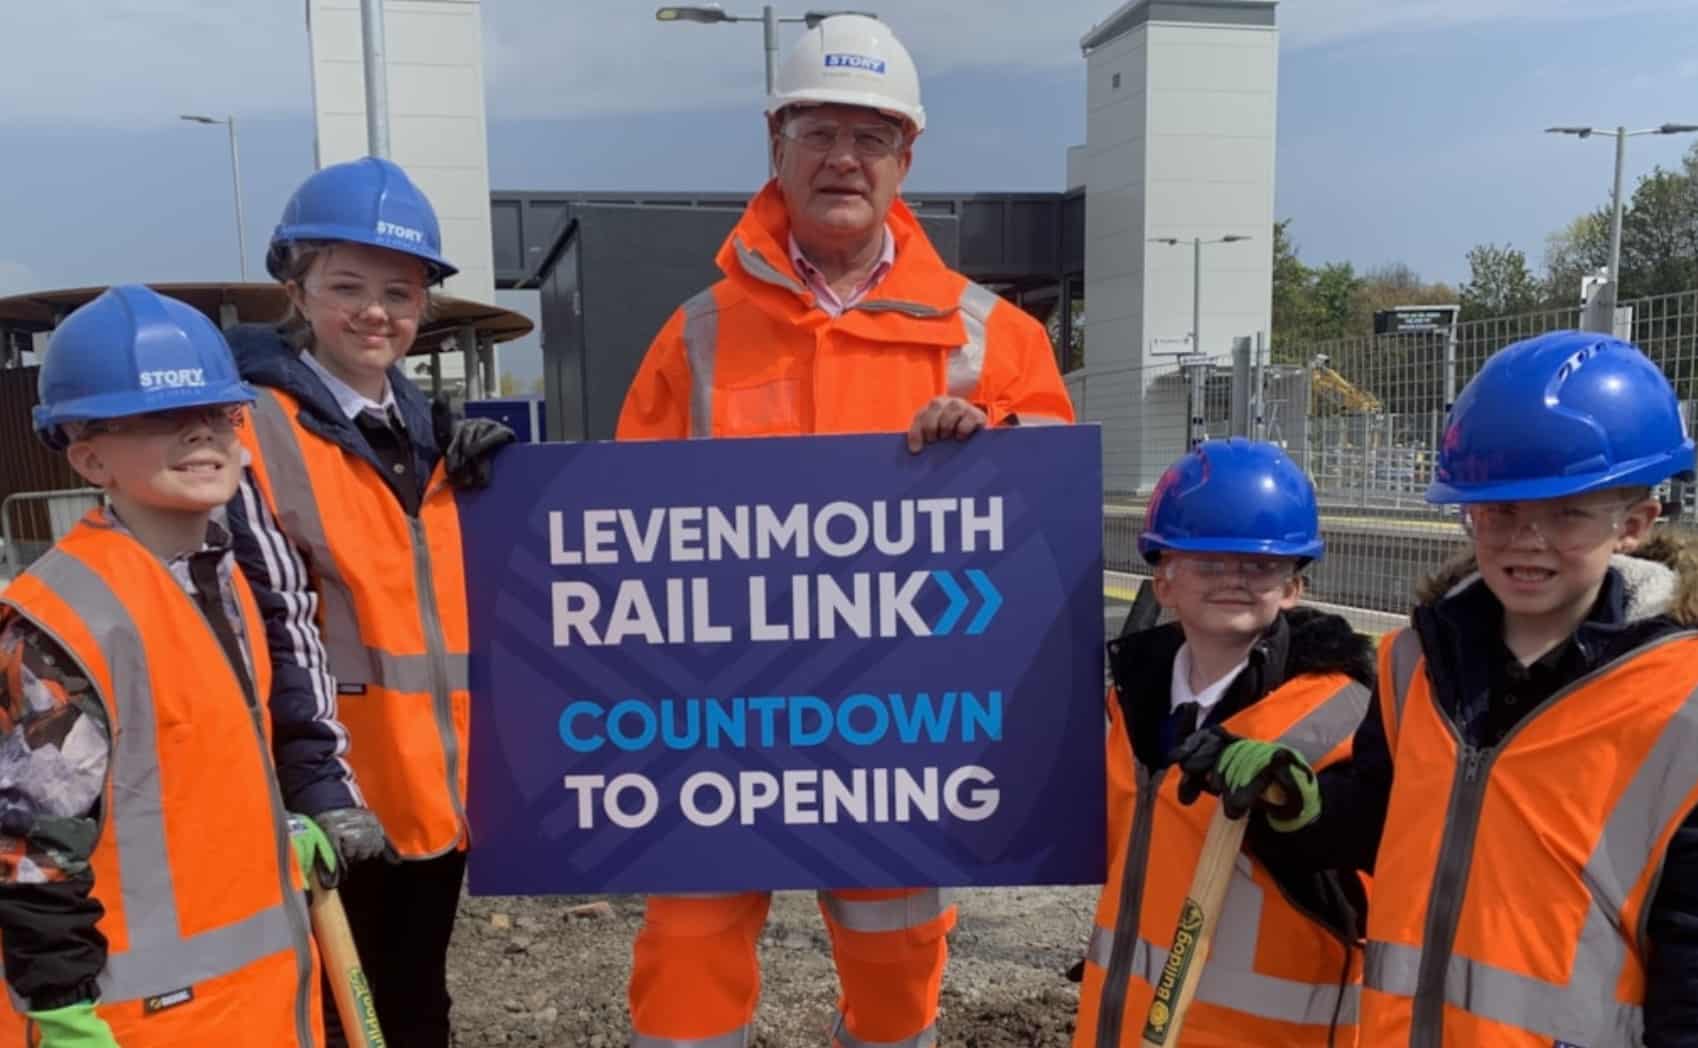 First Minister to lead Levenmouth opening